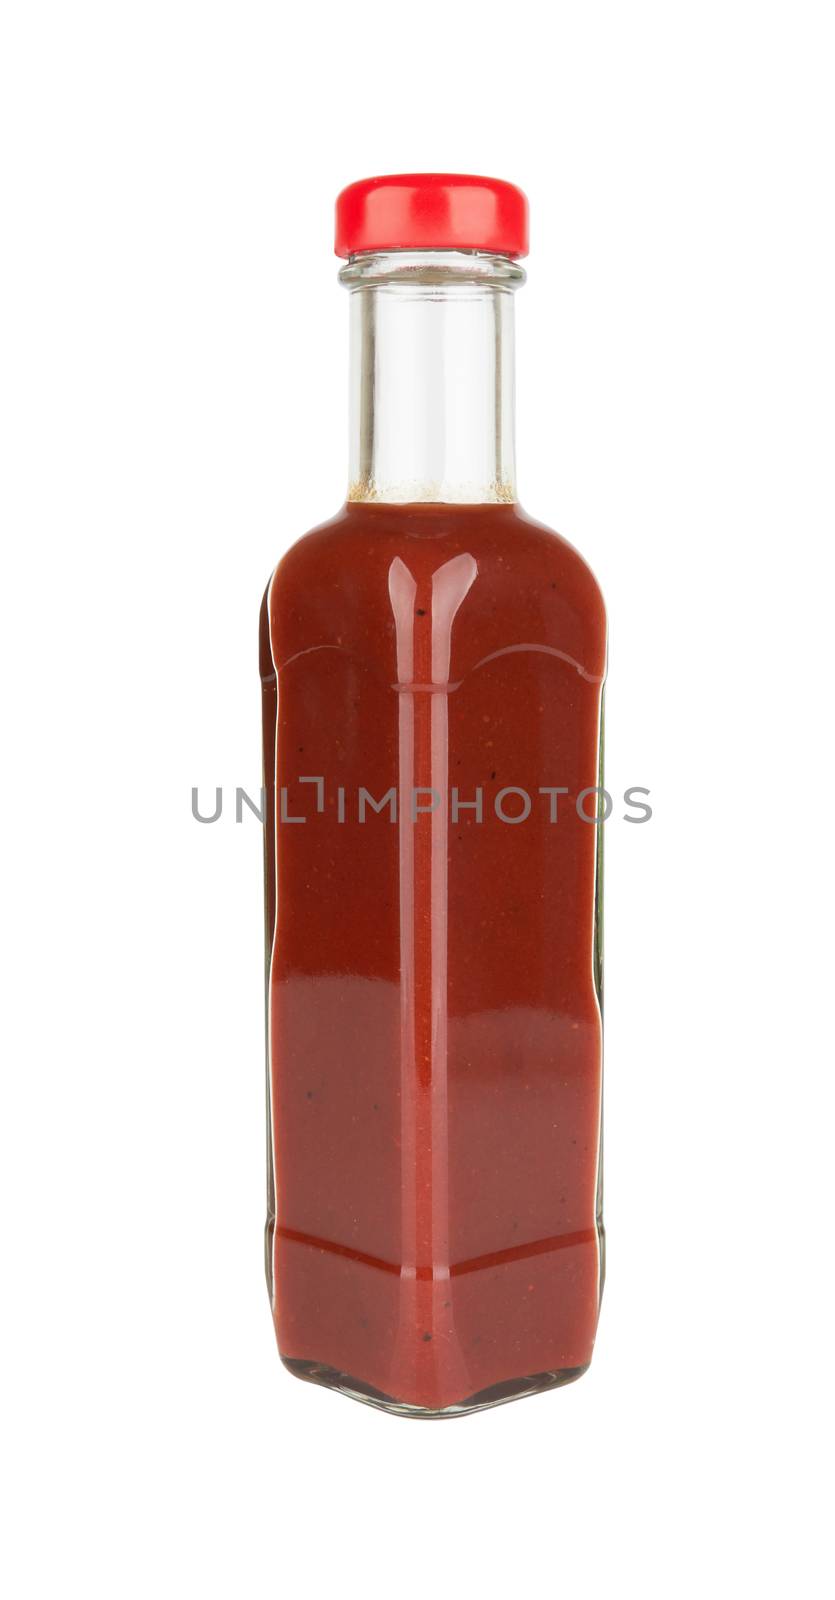 Bottle of red hot sauce isolated on white background